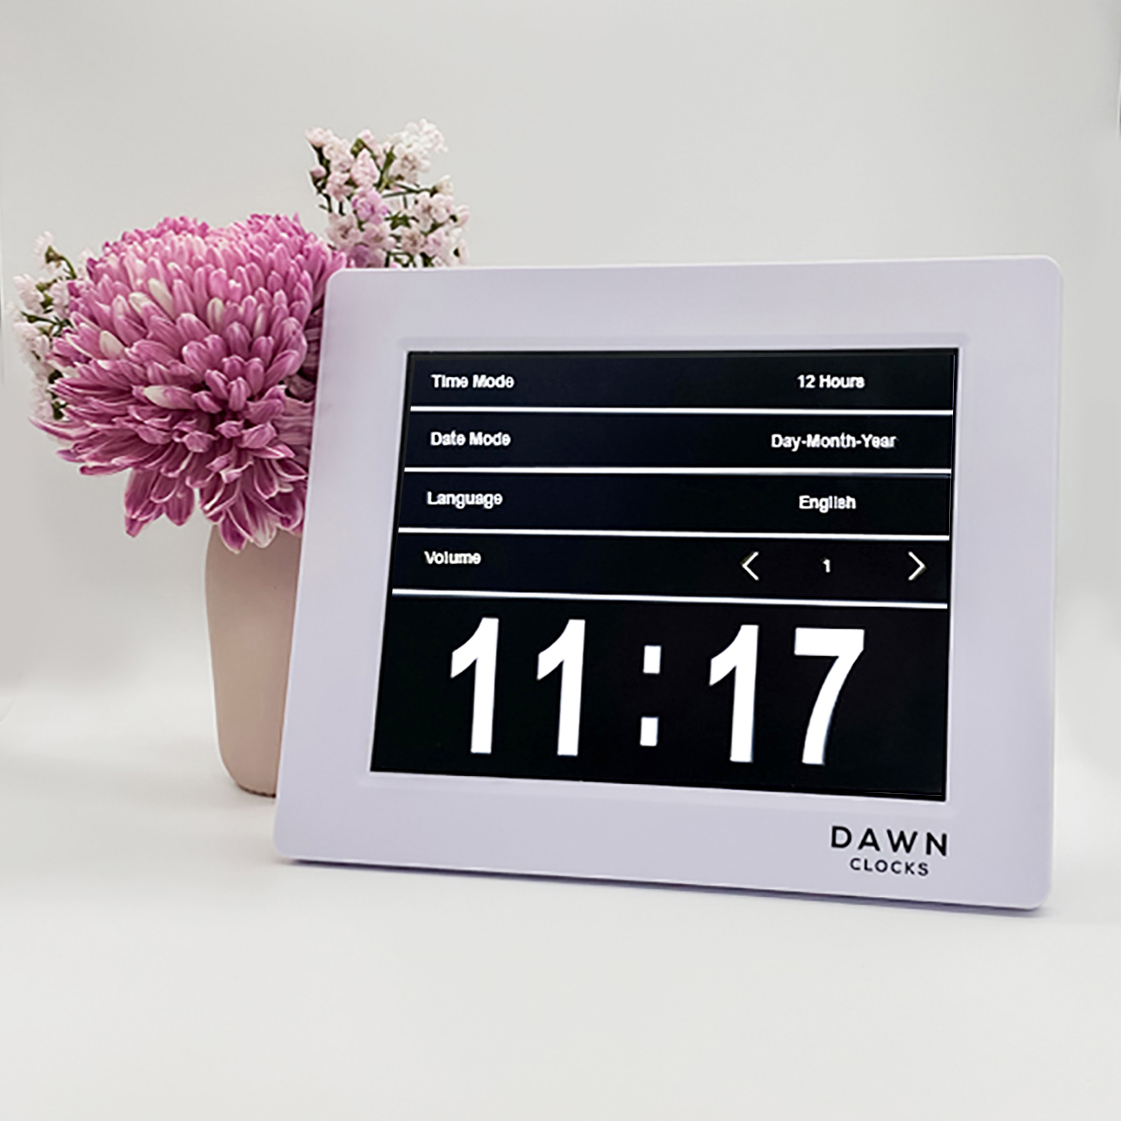 Original Dawn Clock shown on a table with a menu example on the screen. This is ideal for all ages and proved essential for NDIS participants, people living with Dementia, people living with a disability and seniors.